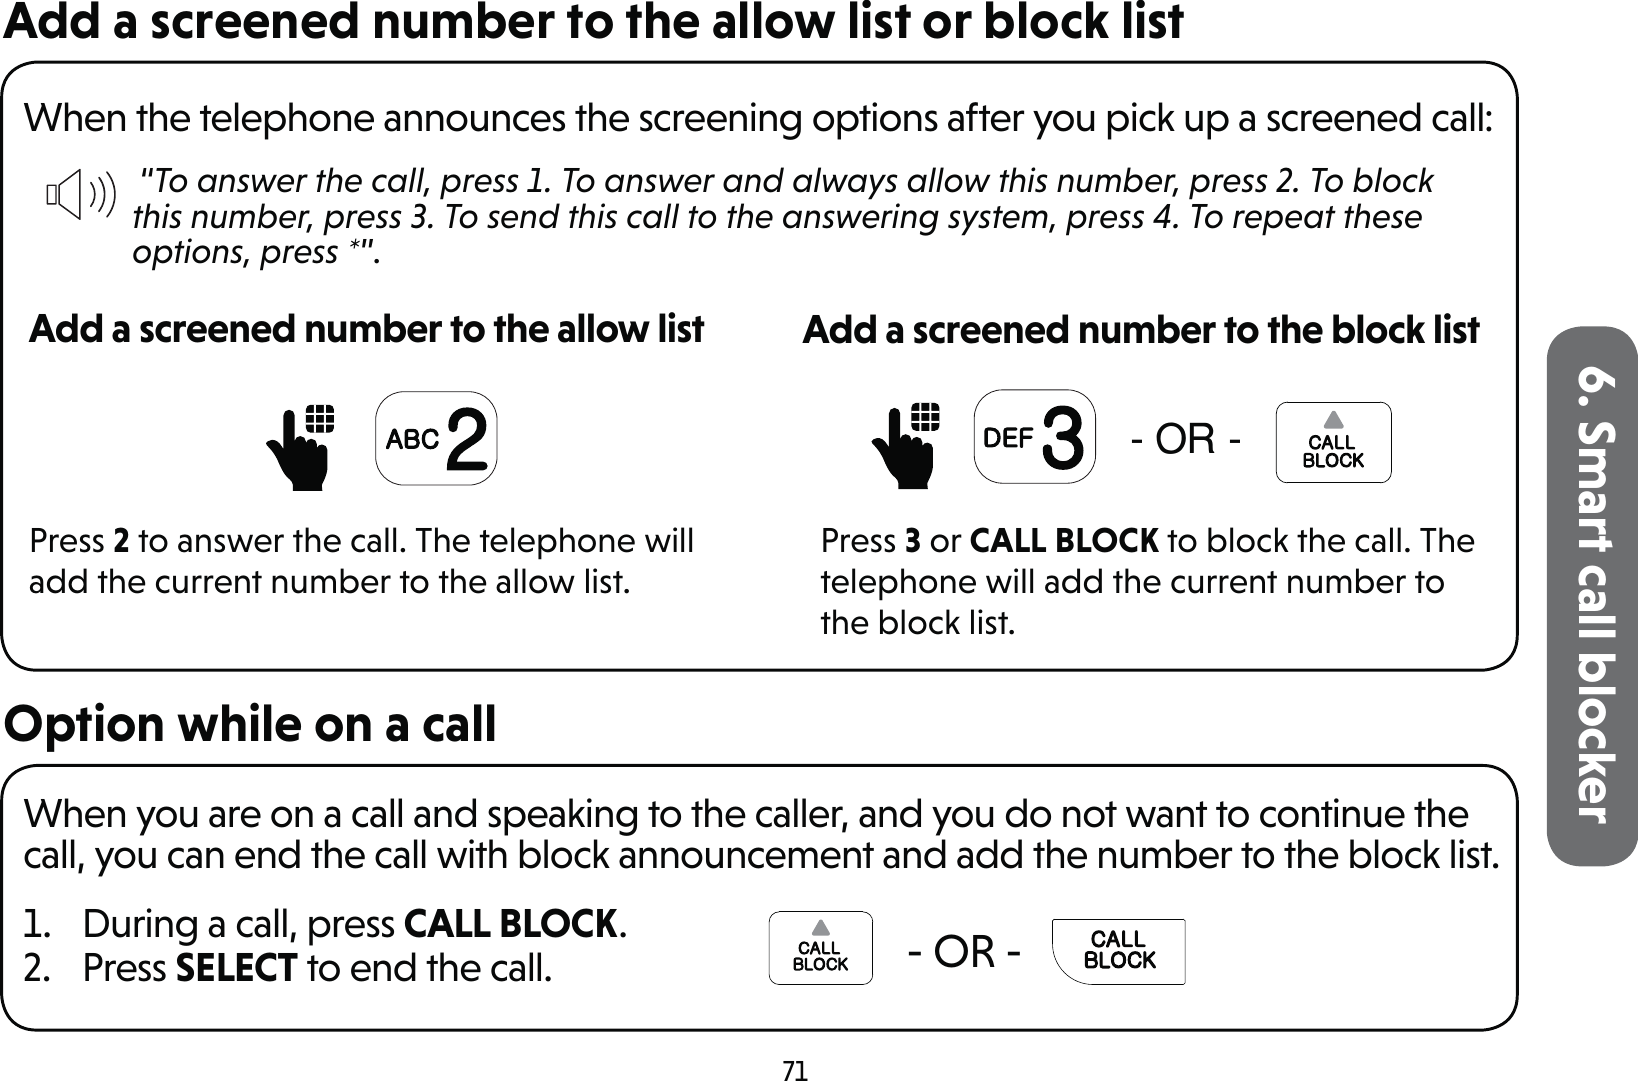 716. Smart call blockerAdd a screened number to the allow list or block listWhen the telephone announces the screening options after you pick up a screened call: “To answer the call, press 1. To answer and always allow this number, press 2. To block this number, press 3. To send this call to the answering system, press 4. To repeat these options, press *”.Add a screened number to the allow listPress 2 to answer the call. The telephone will add the current number to the allow list.25Add a screened number to the block listPress 3 or CALL BLOCK to block the call. The telephone will add the current number to the block list.Option while on a callWhen you are on a call and speaking to the caller, and you do not want to continue the call, you can end the call with block announcement and add the number to the block list.1.  During a call, press CALL BLOCK.2. Press SELECT to end the call.    - OR -   